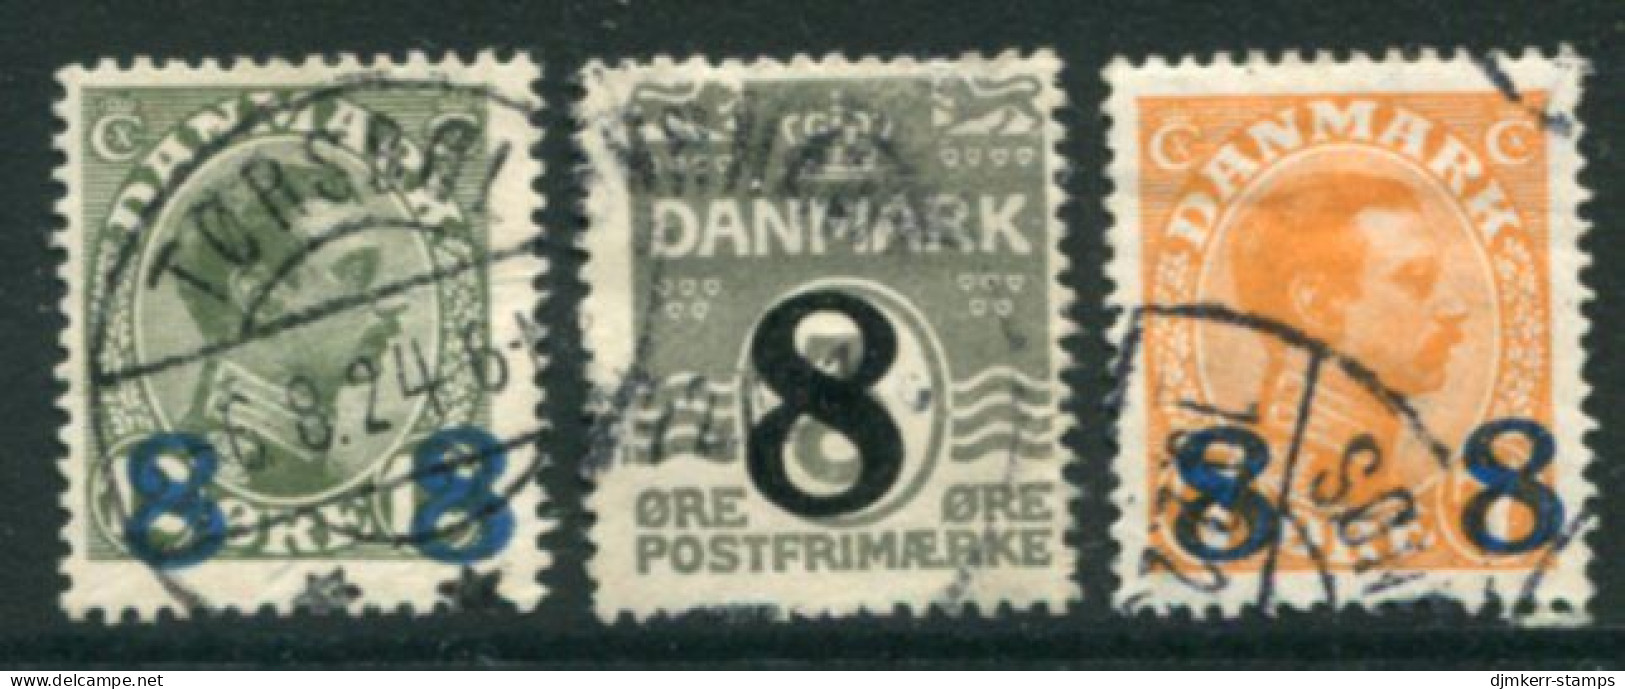 DENMARK 1921  8 Øre Surcharges Used.  Michel 113, 129-30 - Used Stamps